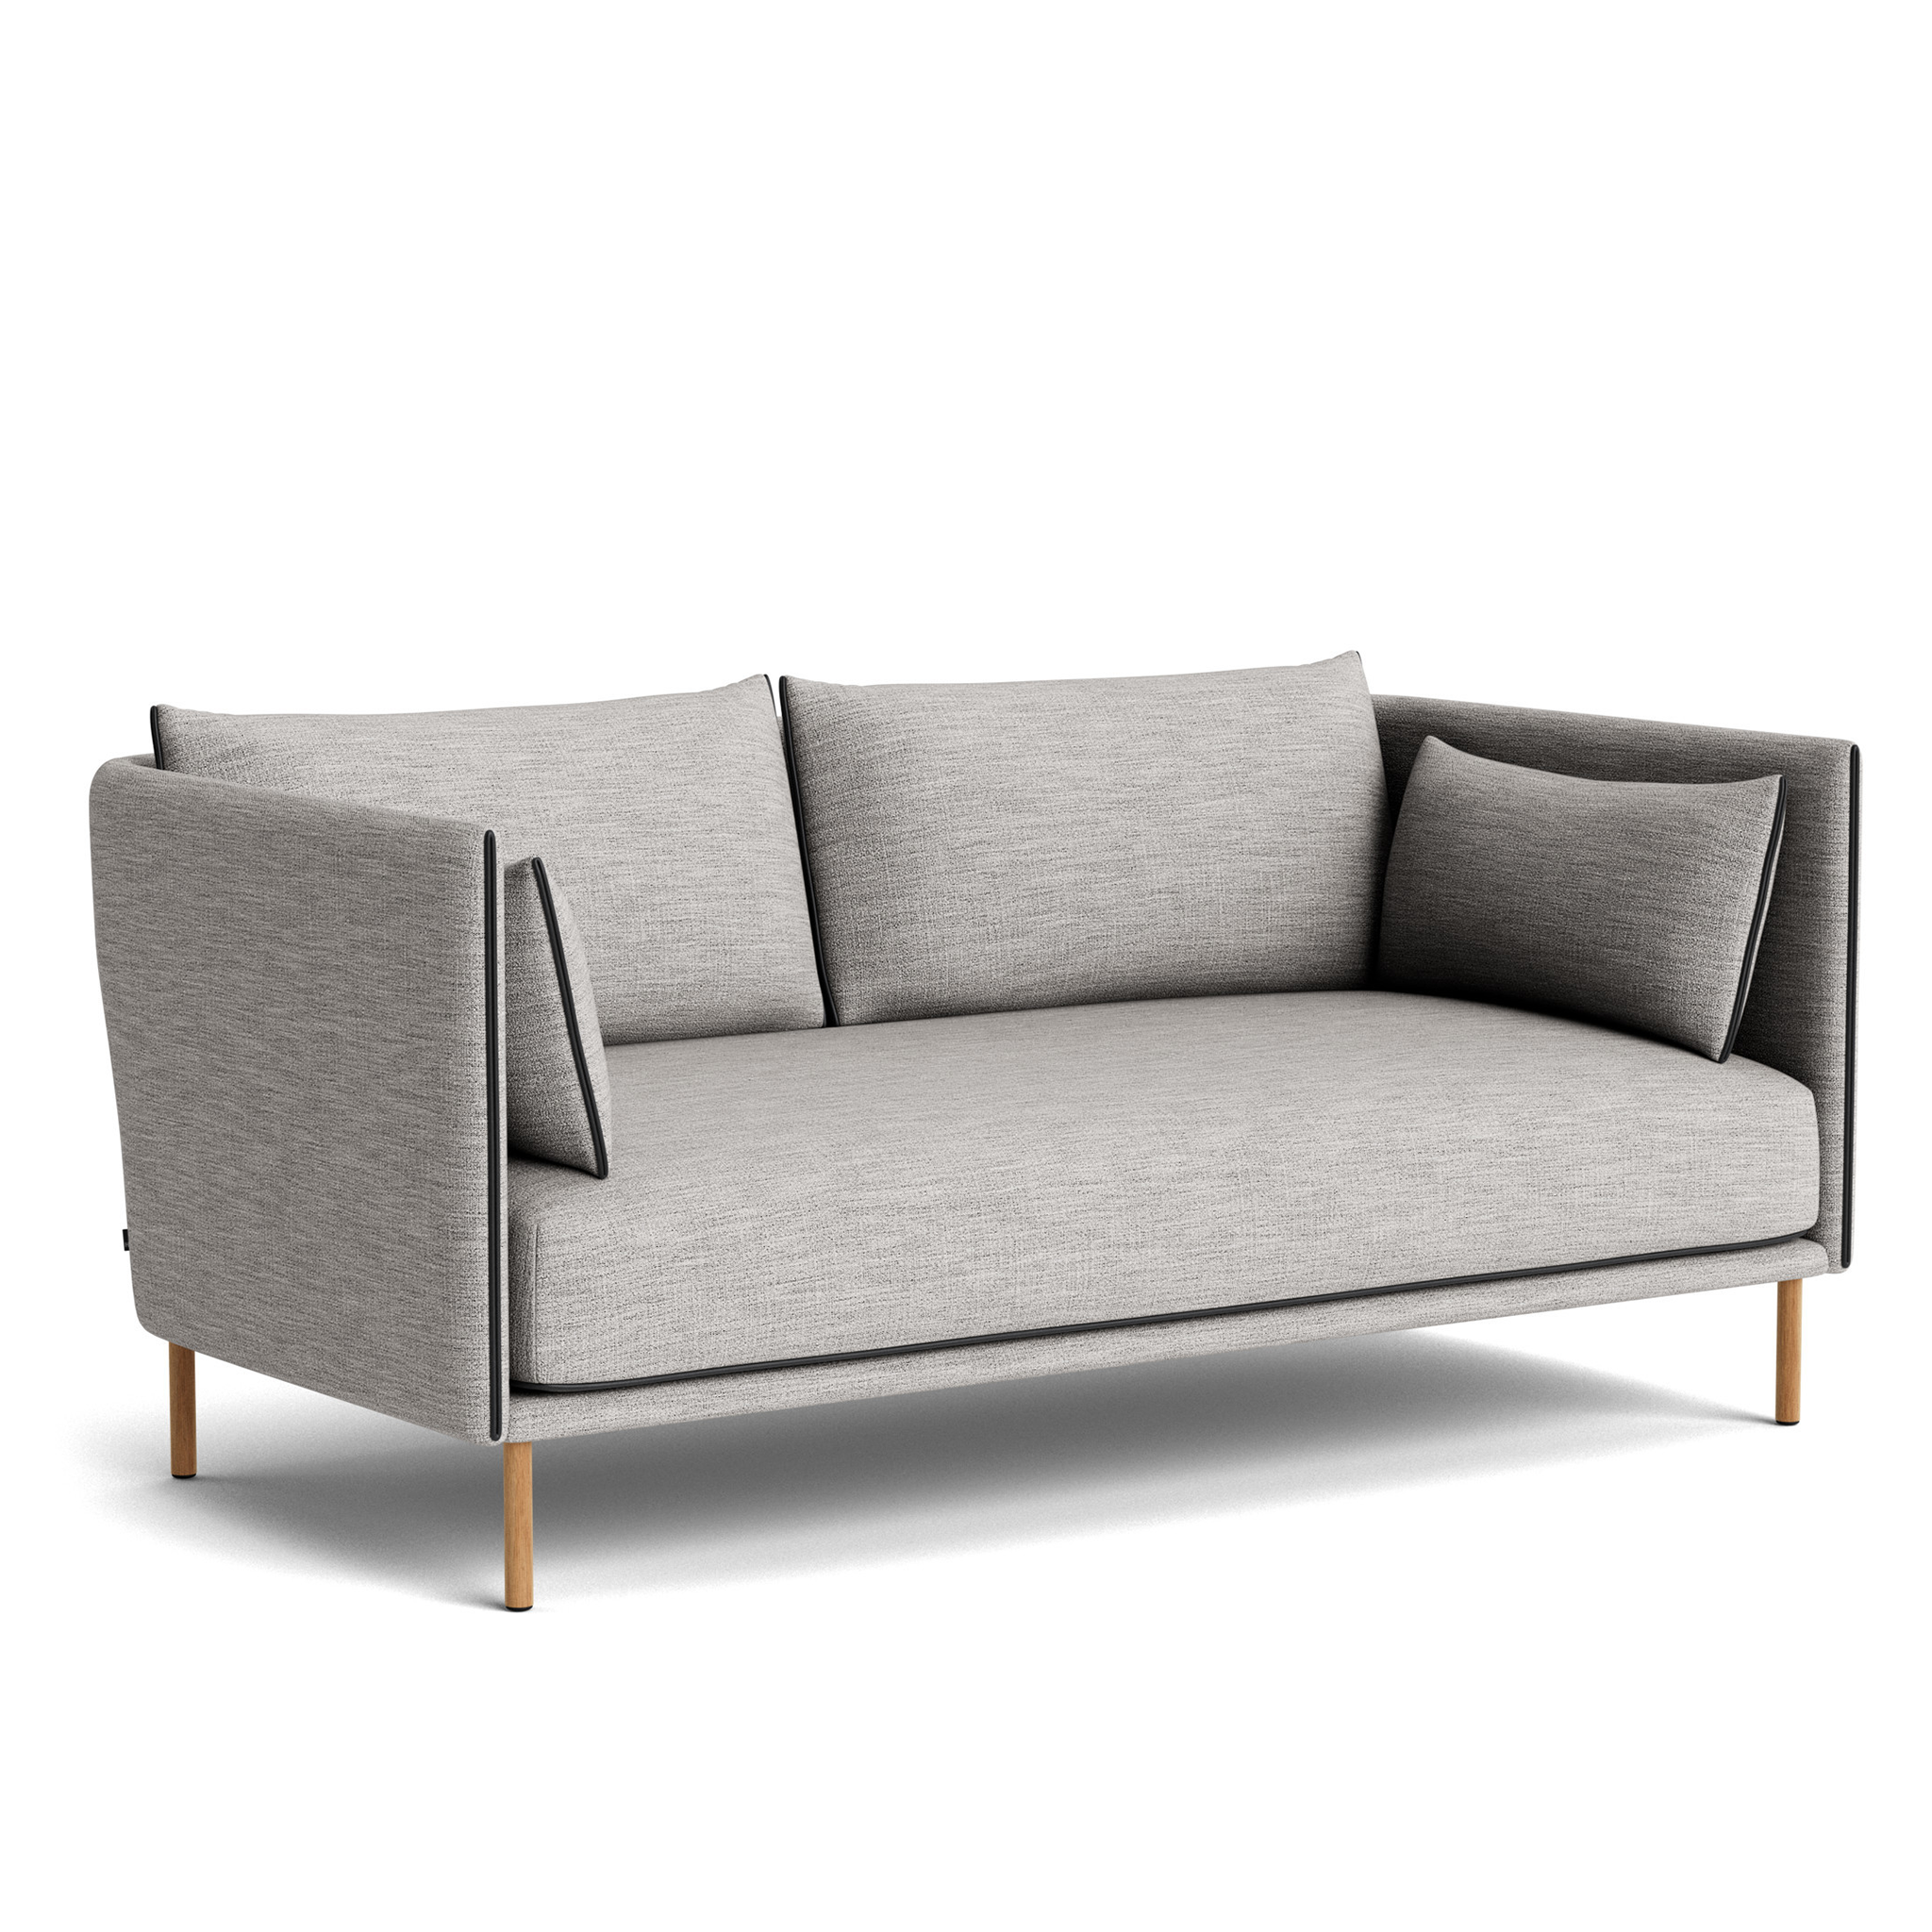 Silhouette Mono Sofa 2 Seater by Hay